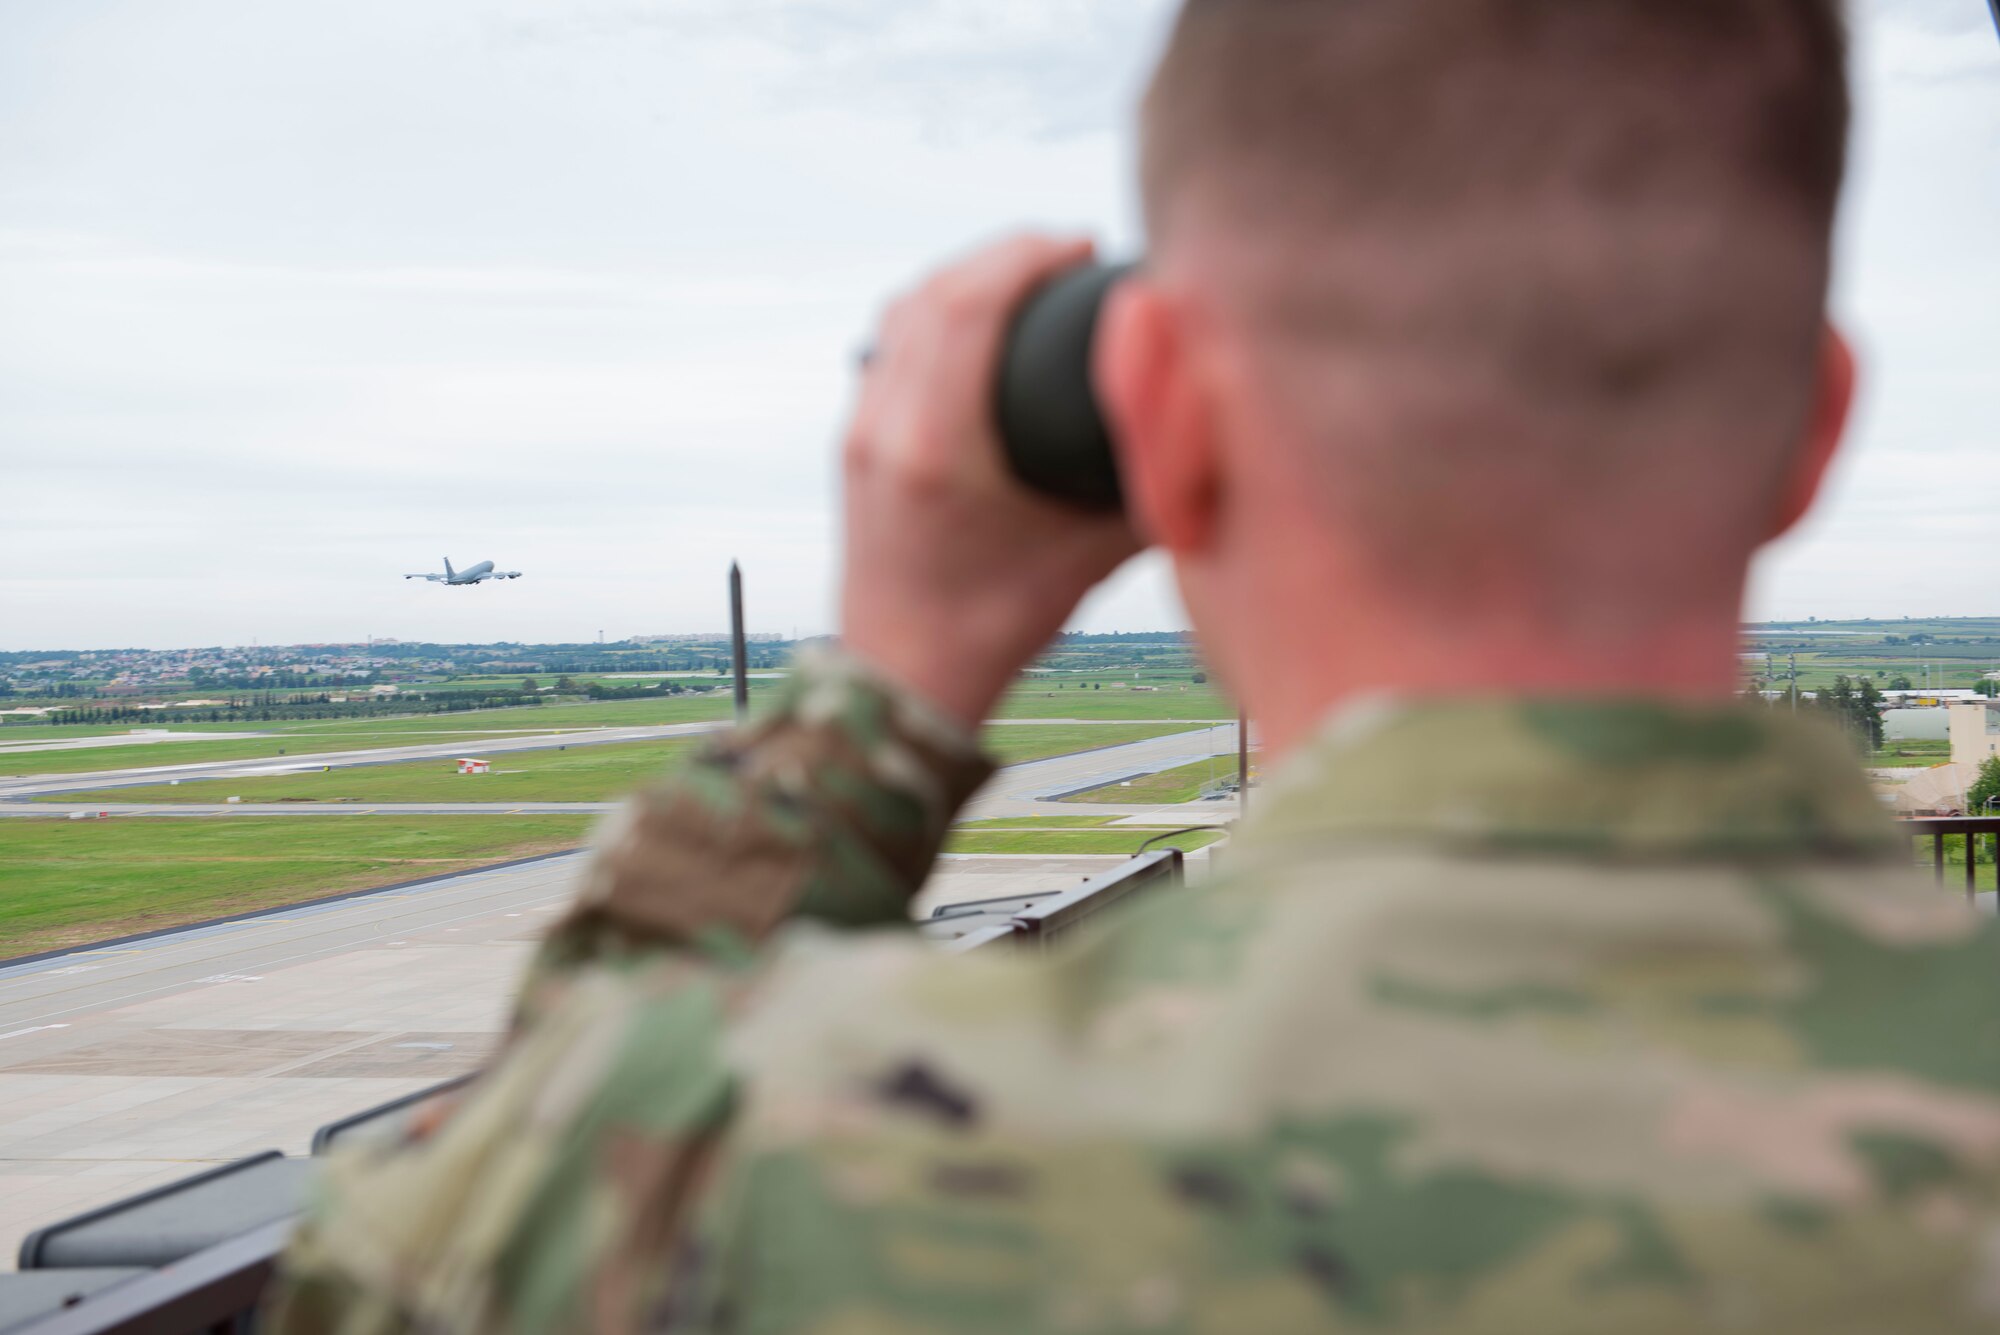 U.S. Air Force Tech. Sgt. Damian Mize, 39th Operation Support Squadron air traffic control watch supervisor, watches an aircraft take off at Incirlik Air Base, Turkey, April 24, 2020.